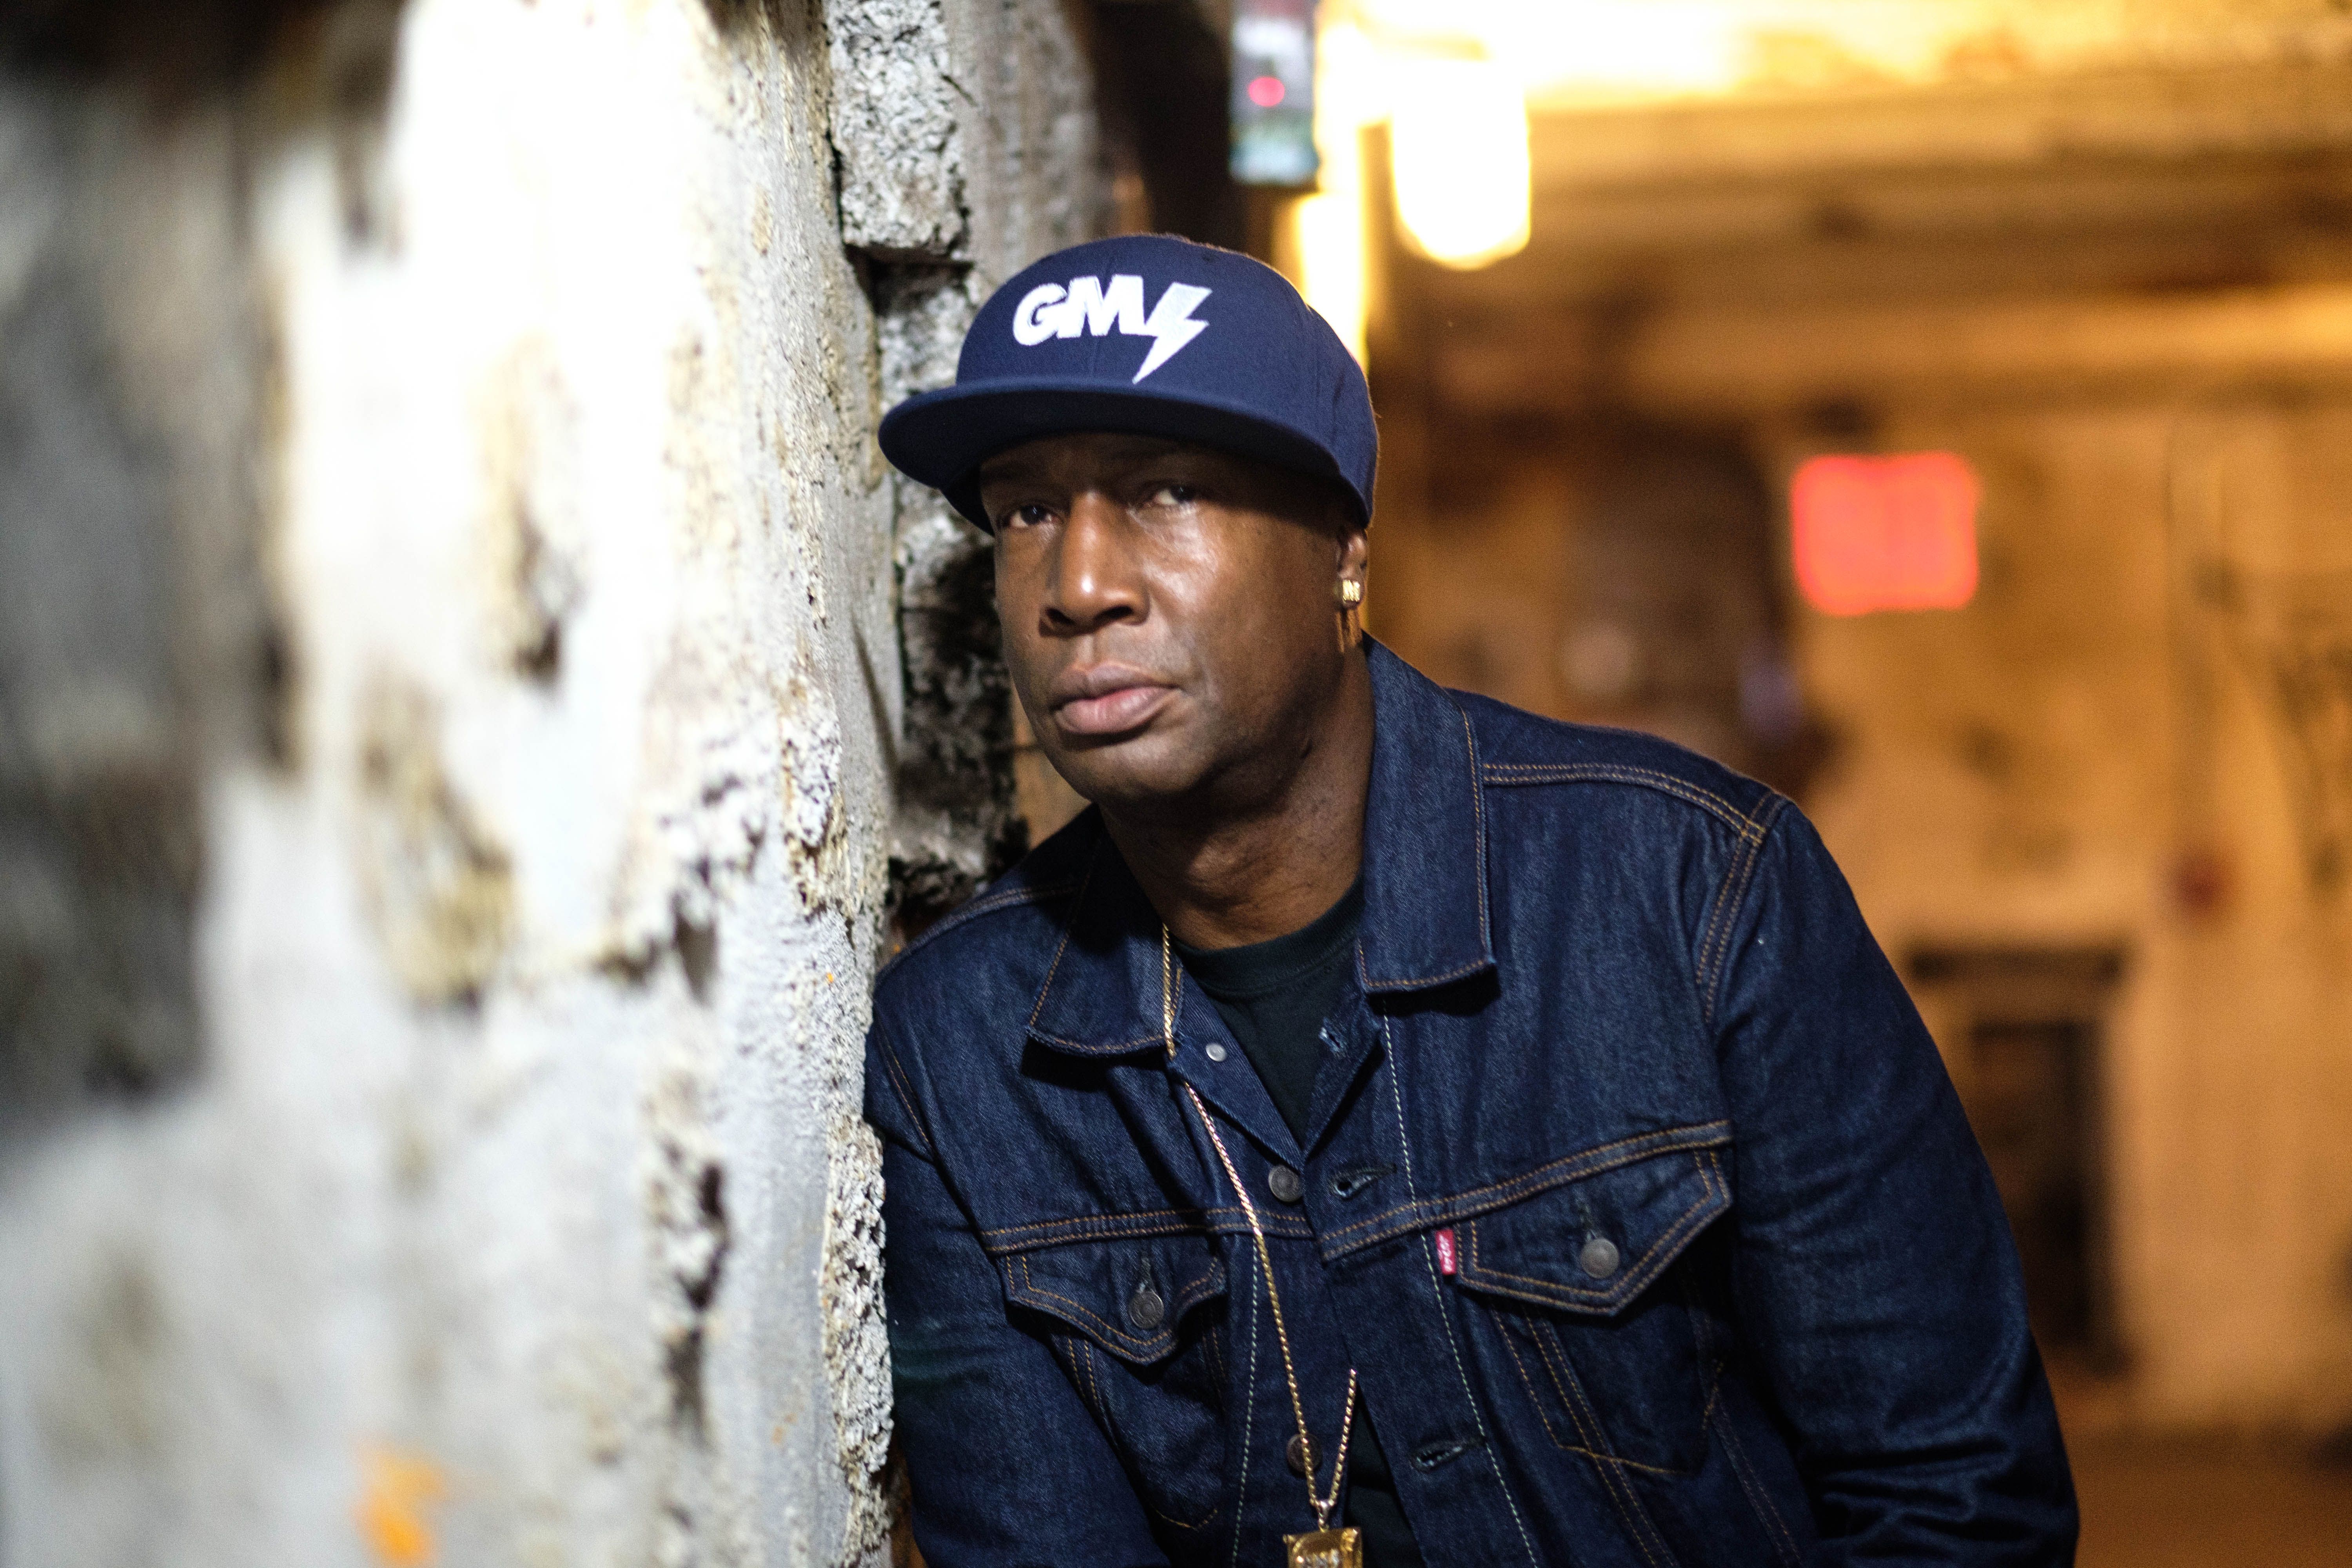 Grandmaster Flash is playing in Largo Friday. Tickets are $12.50. Really.